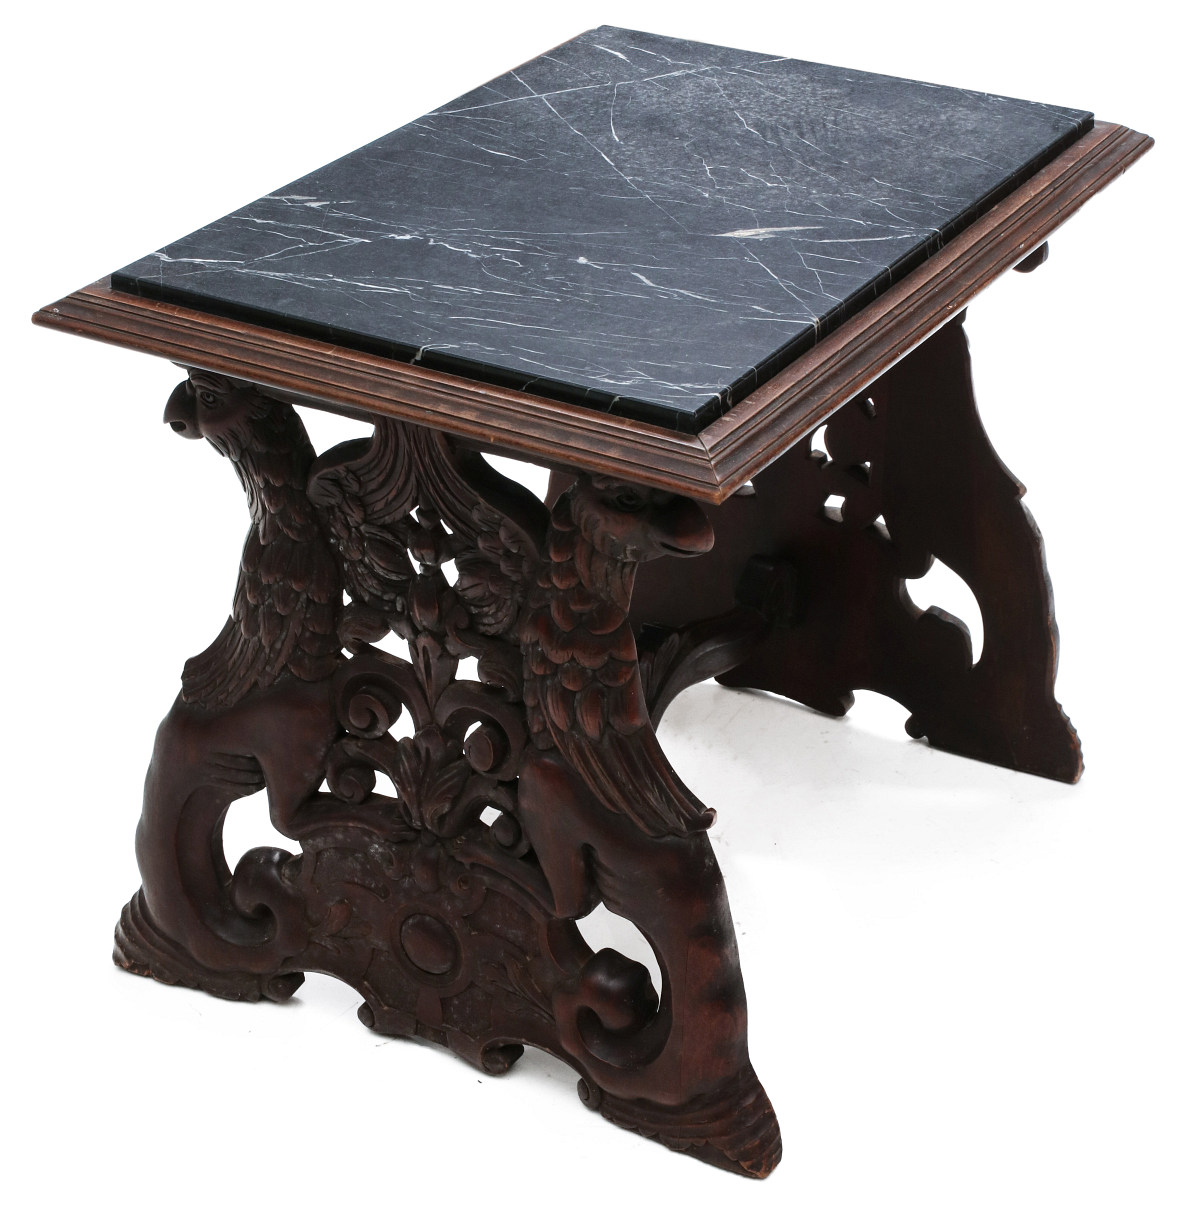 A HEAVILY CARVED SIDE TABLE WITH BLACK MARBLE TOP